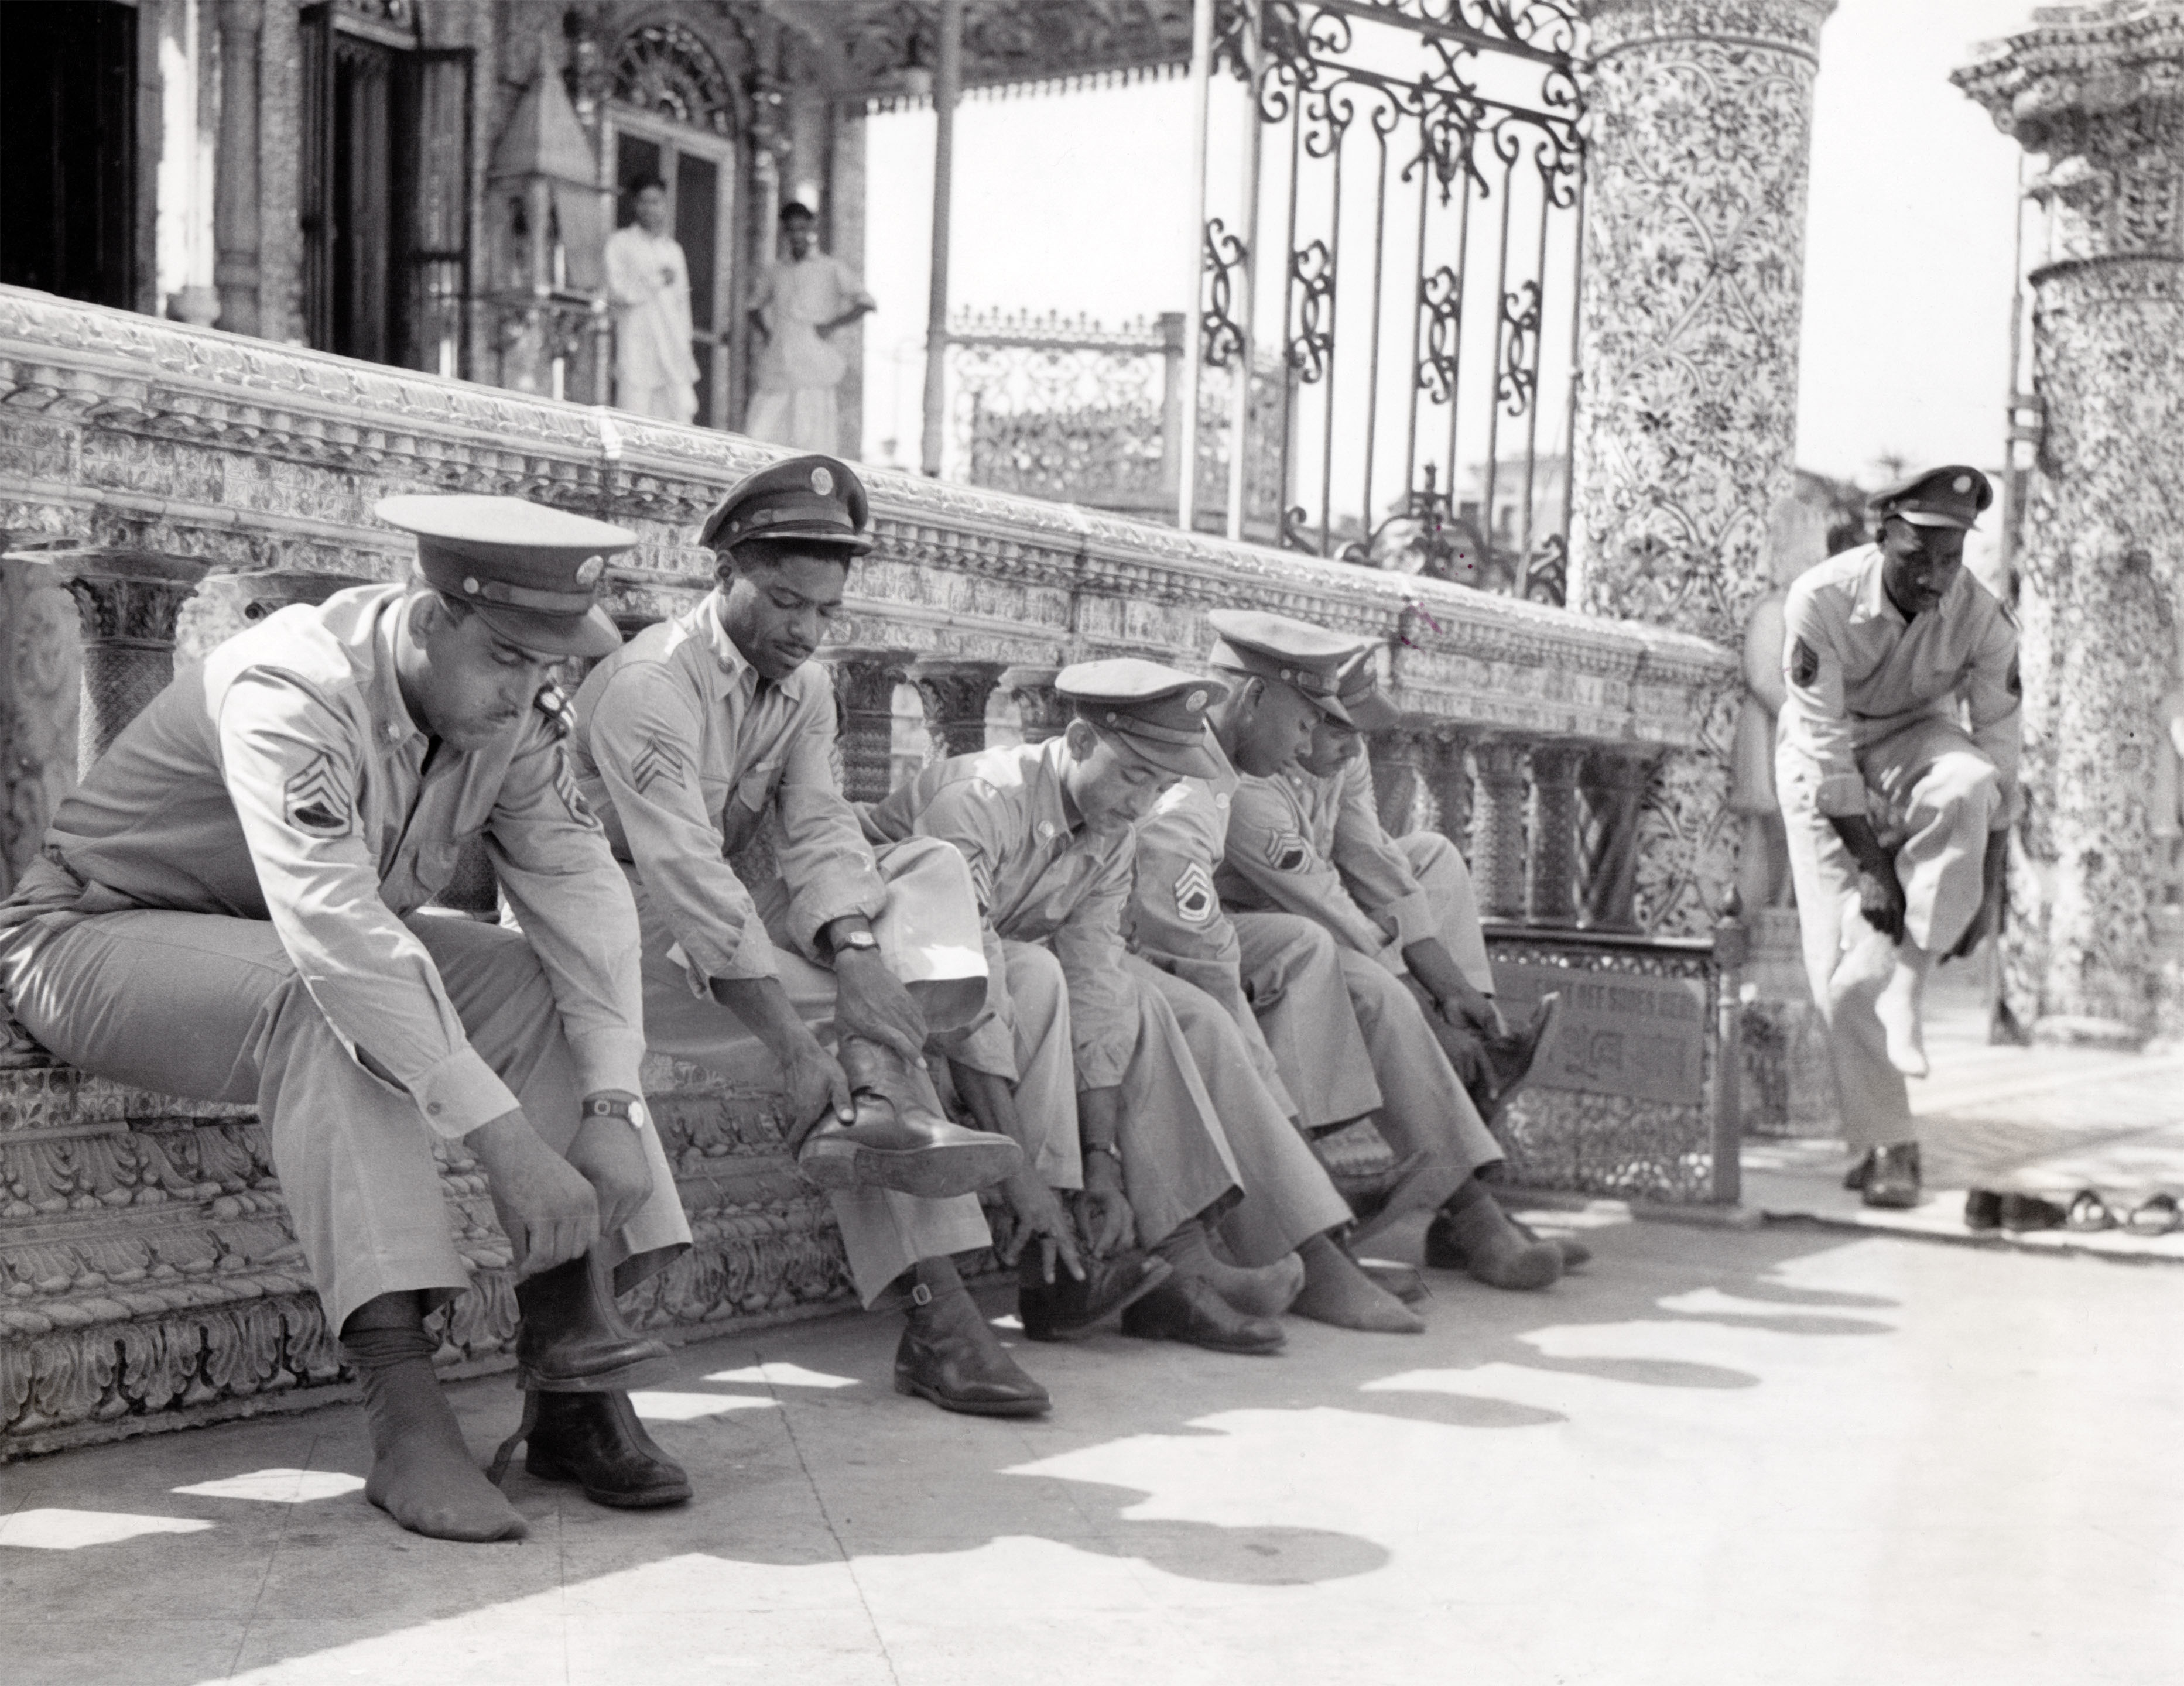 U.S. soldiers respectfully remove shoes before entering the Calcutta Jain Temple, 1943 Calcutta, West Bengal 